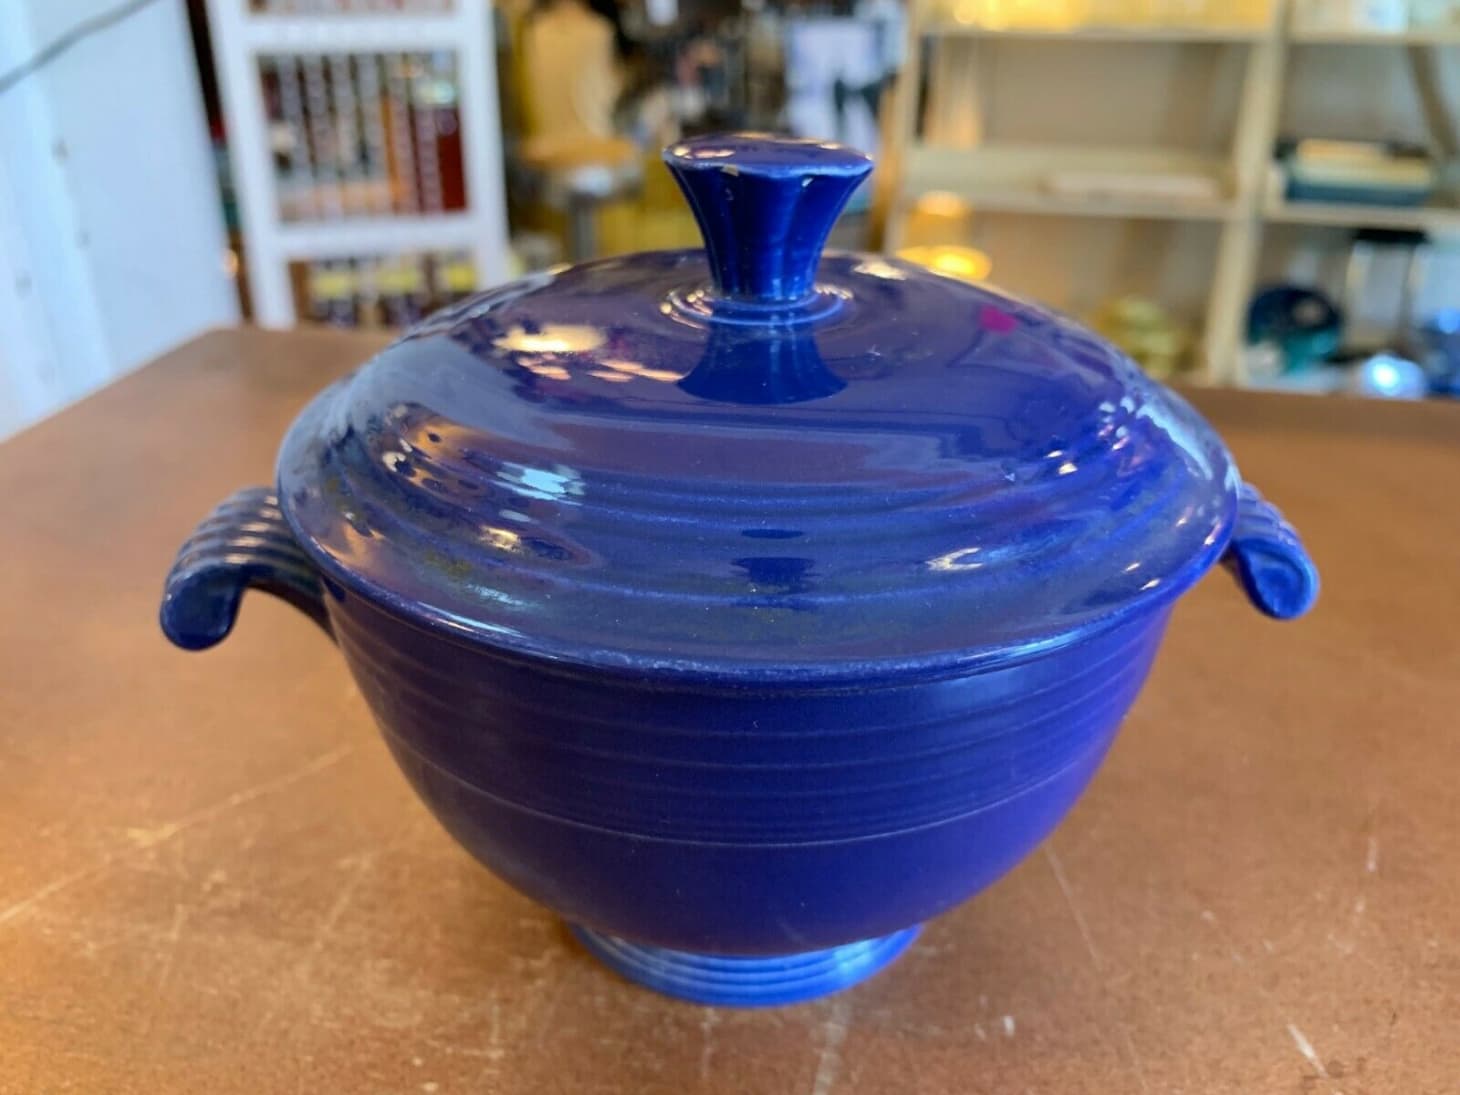 Ebay Fiestaware Selling Price | Apartment Therapy